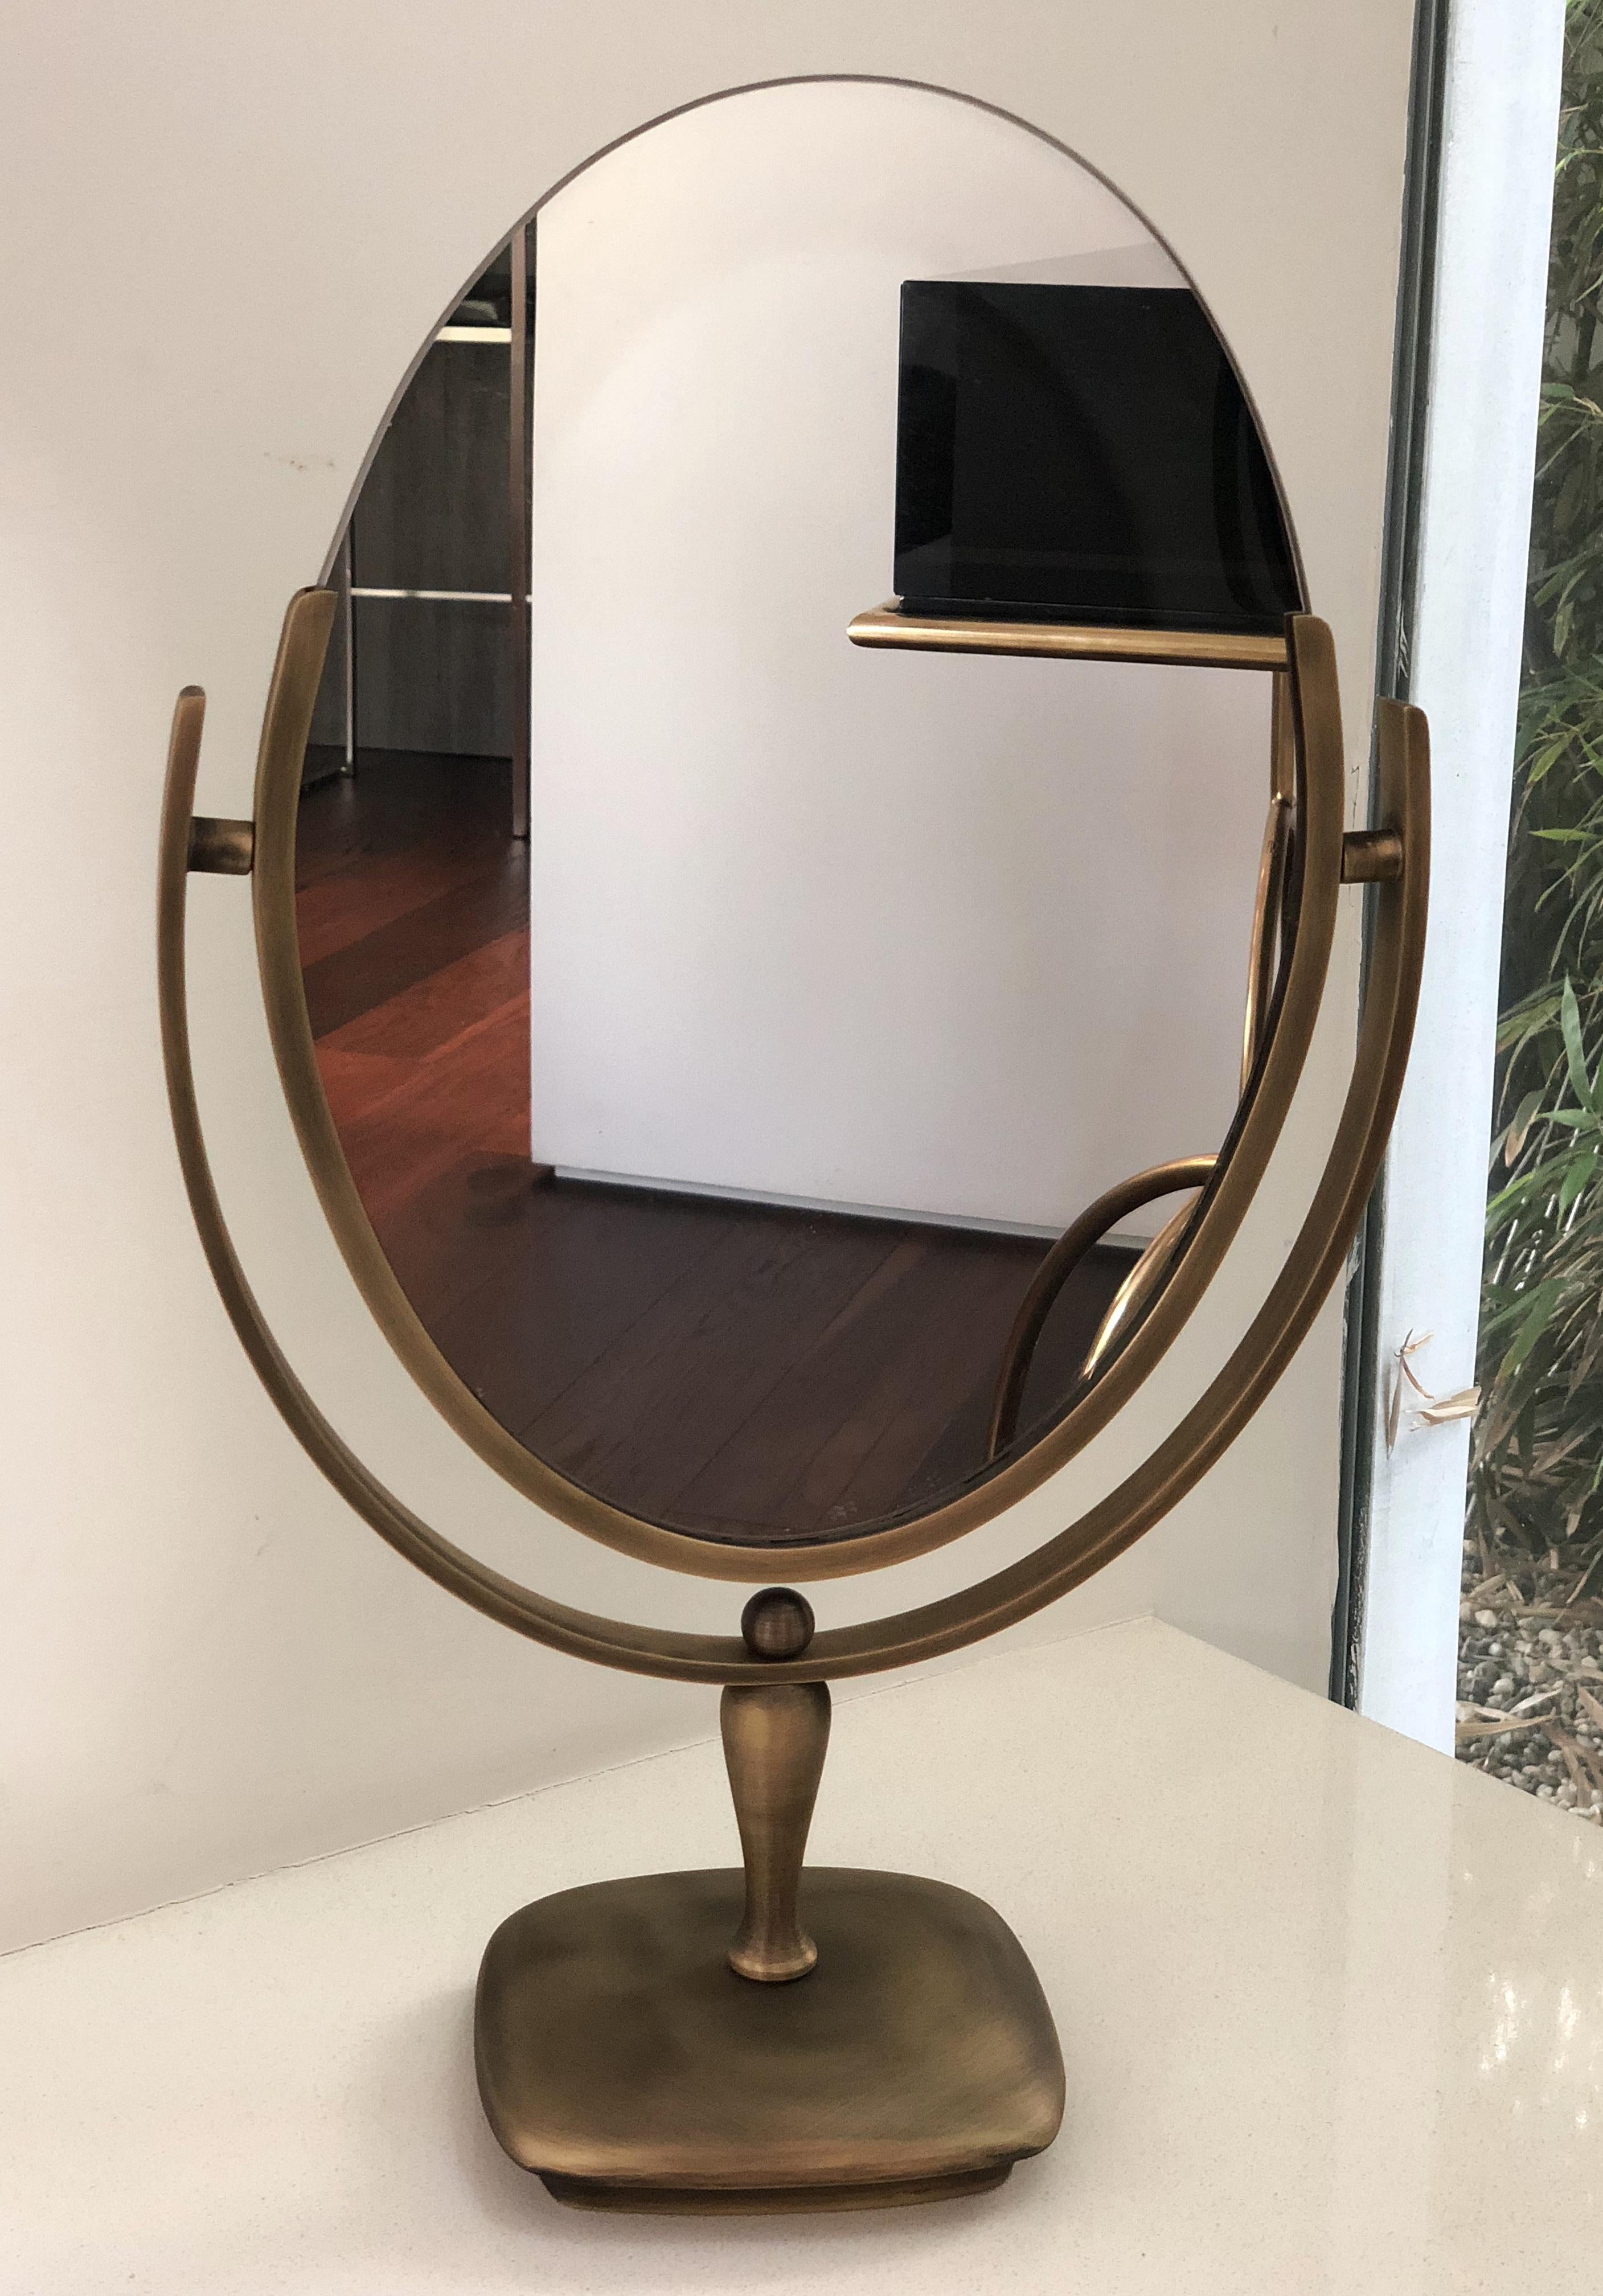 Introducing the Vintage Vanity Mirror in Antique Brass by Charles Hollis Jones, a timeless piece of American craftsmanship from 1968. This exquisite mirror exudes luxury and sophistication, making it the perfect addition to any elegant